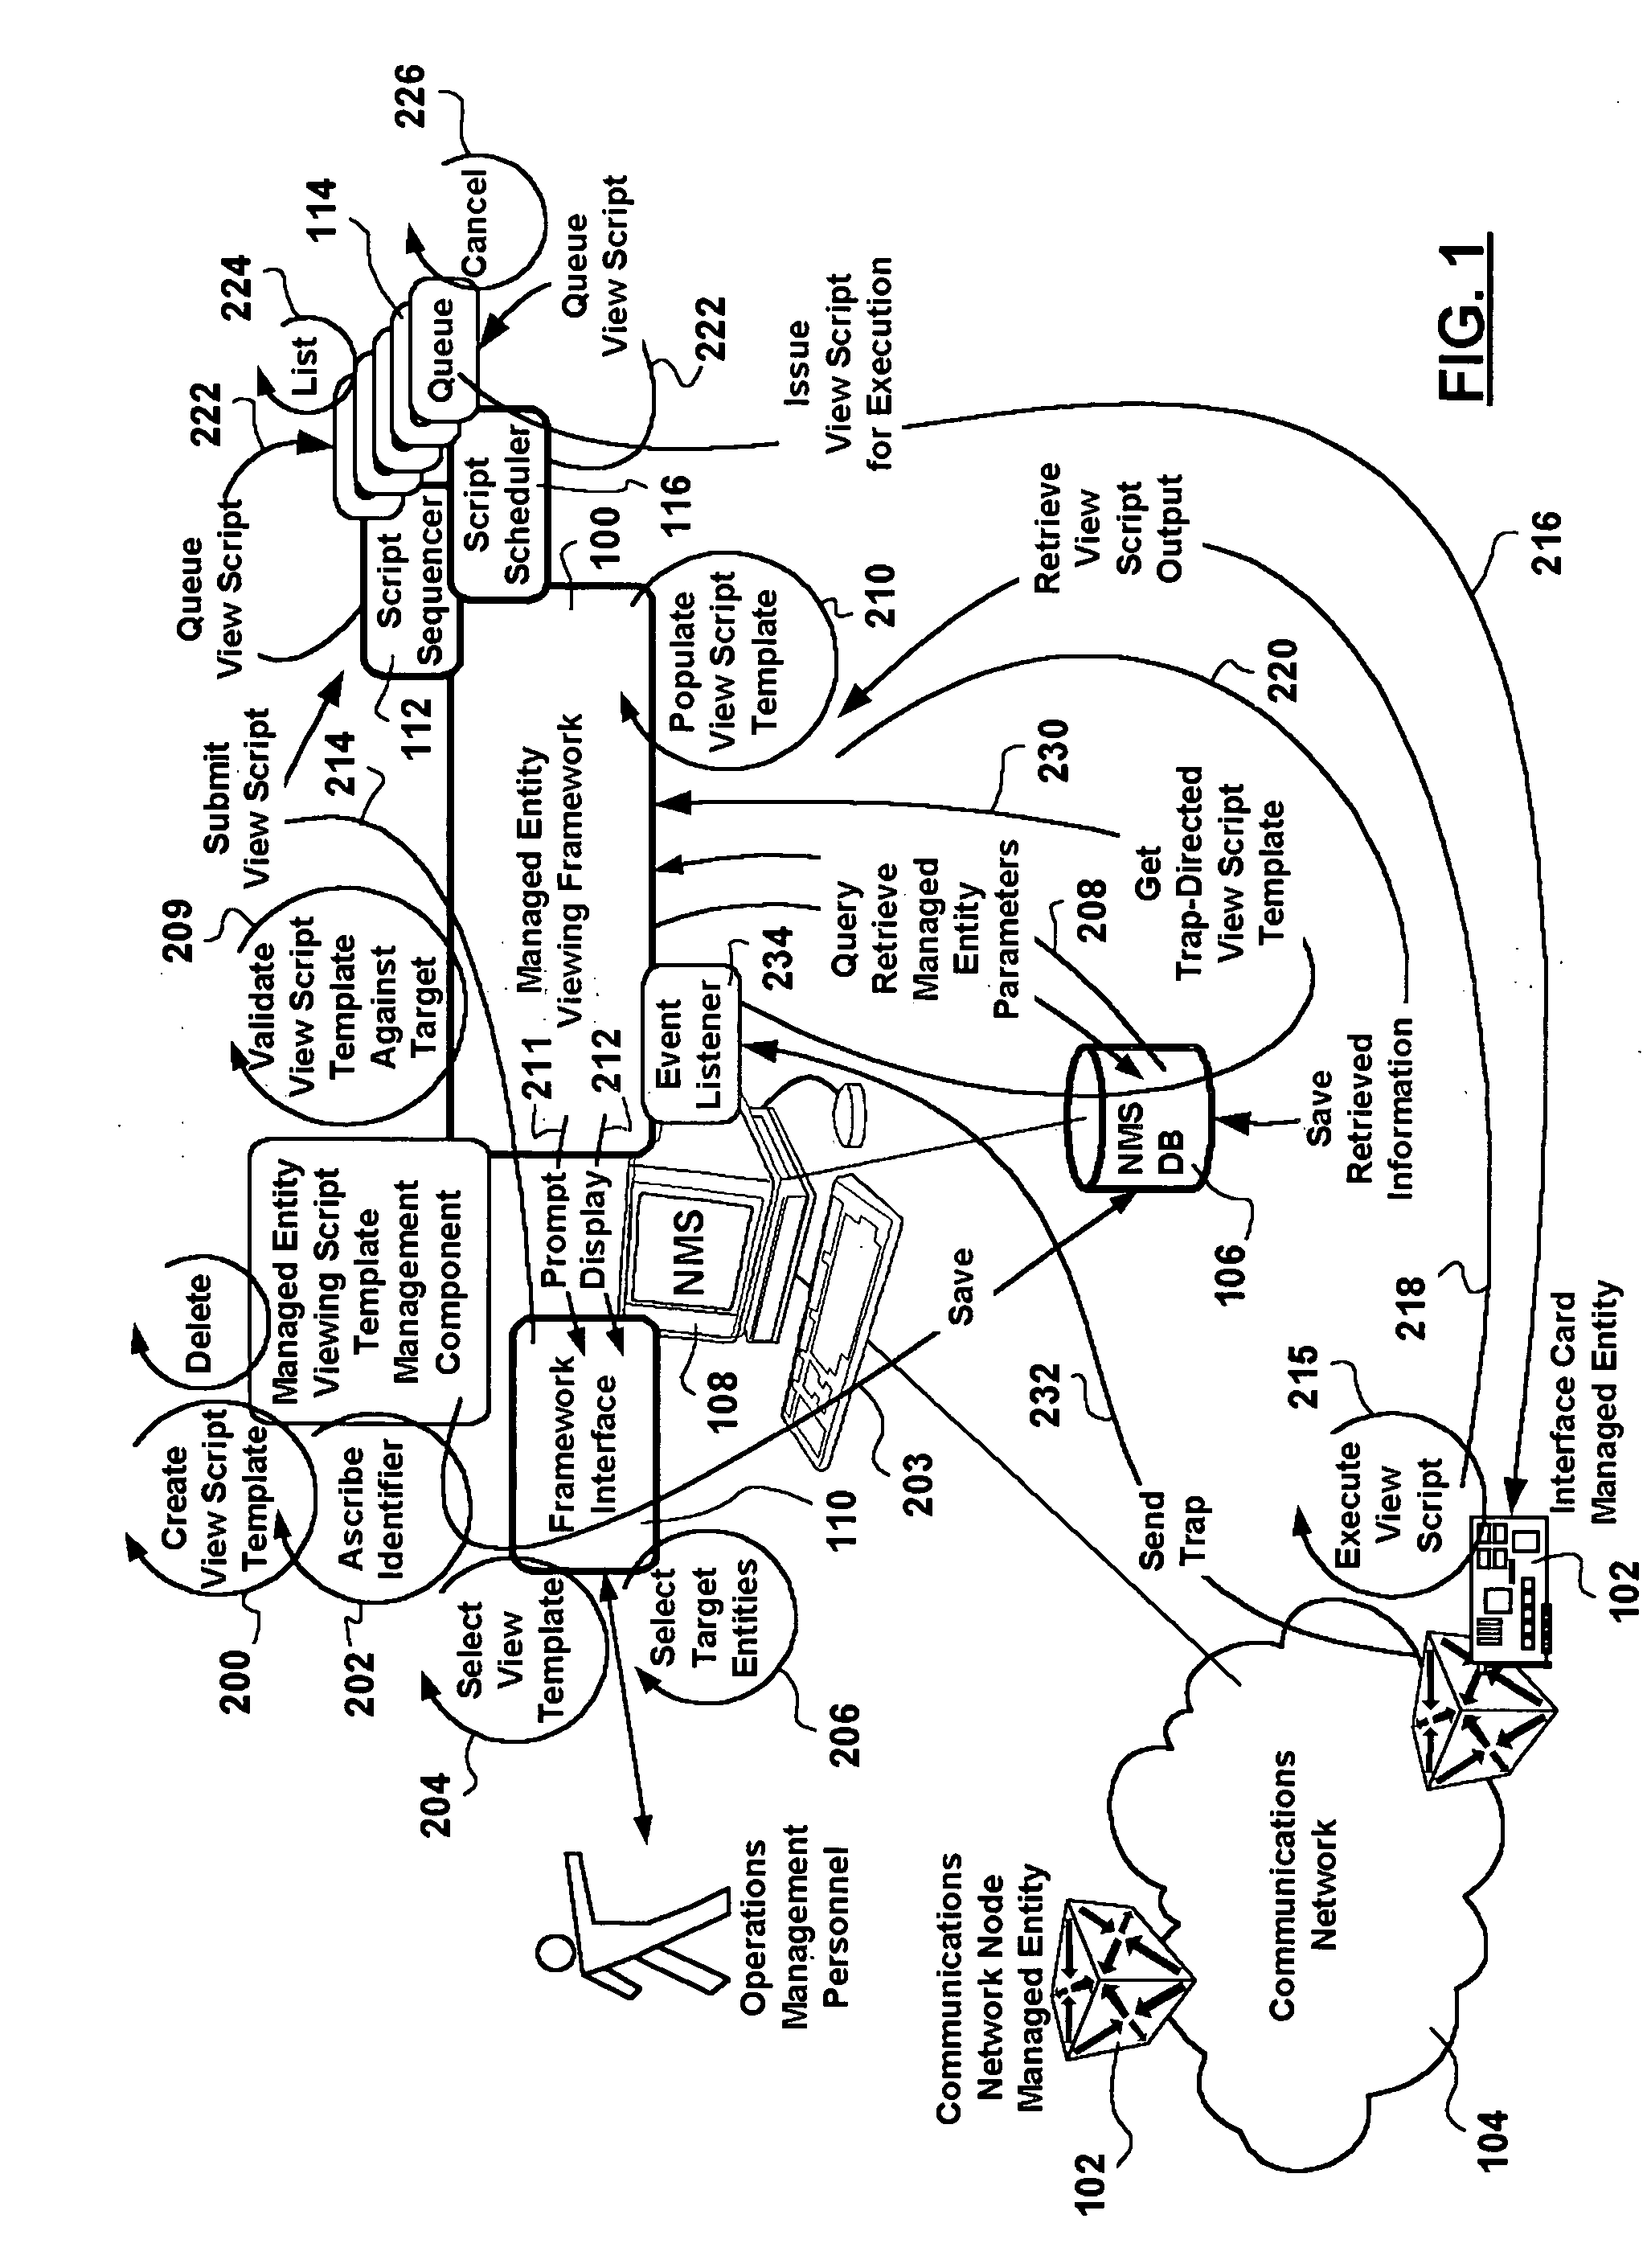 Framework for template-based retrieval of information from managed entities in a communication network